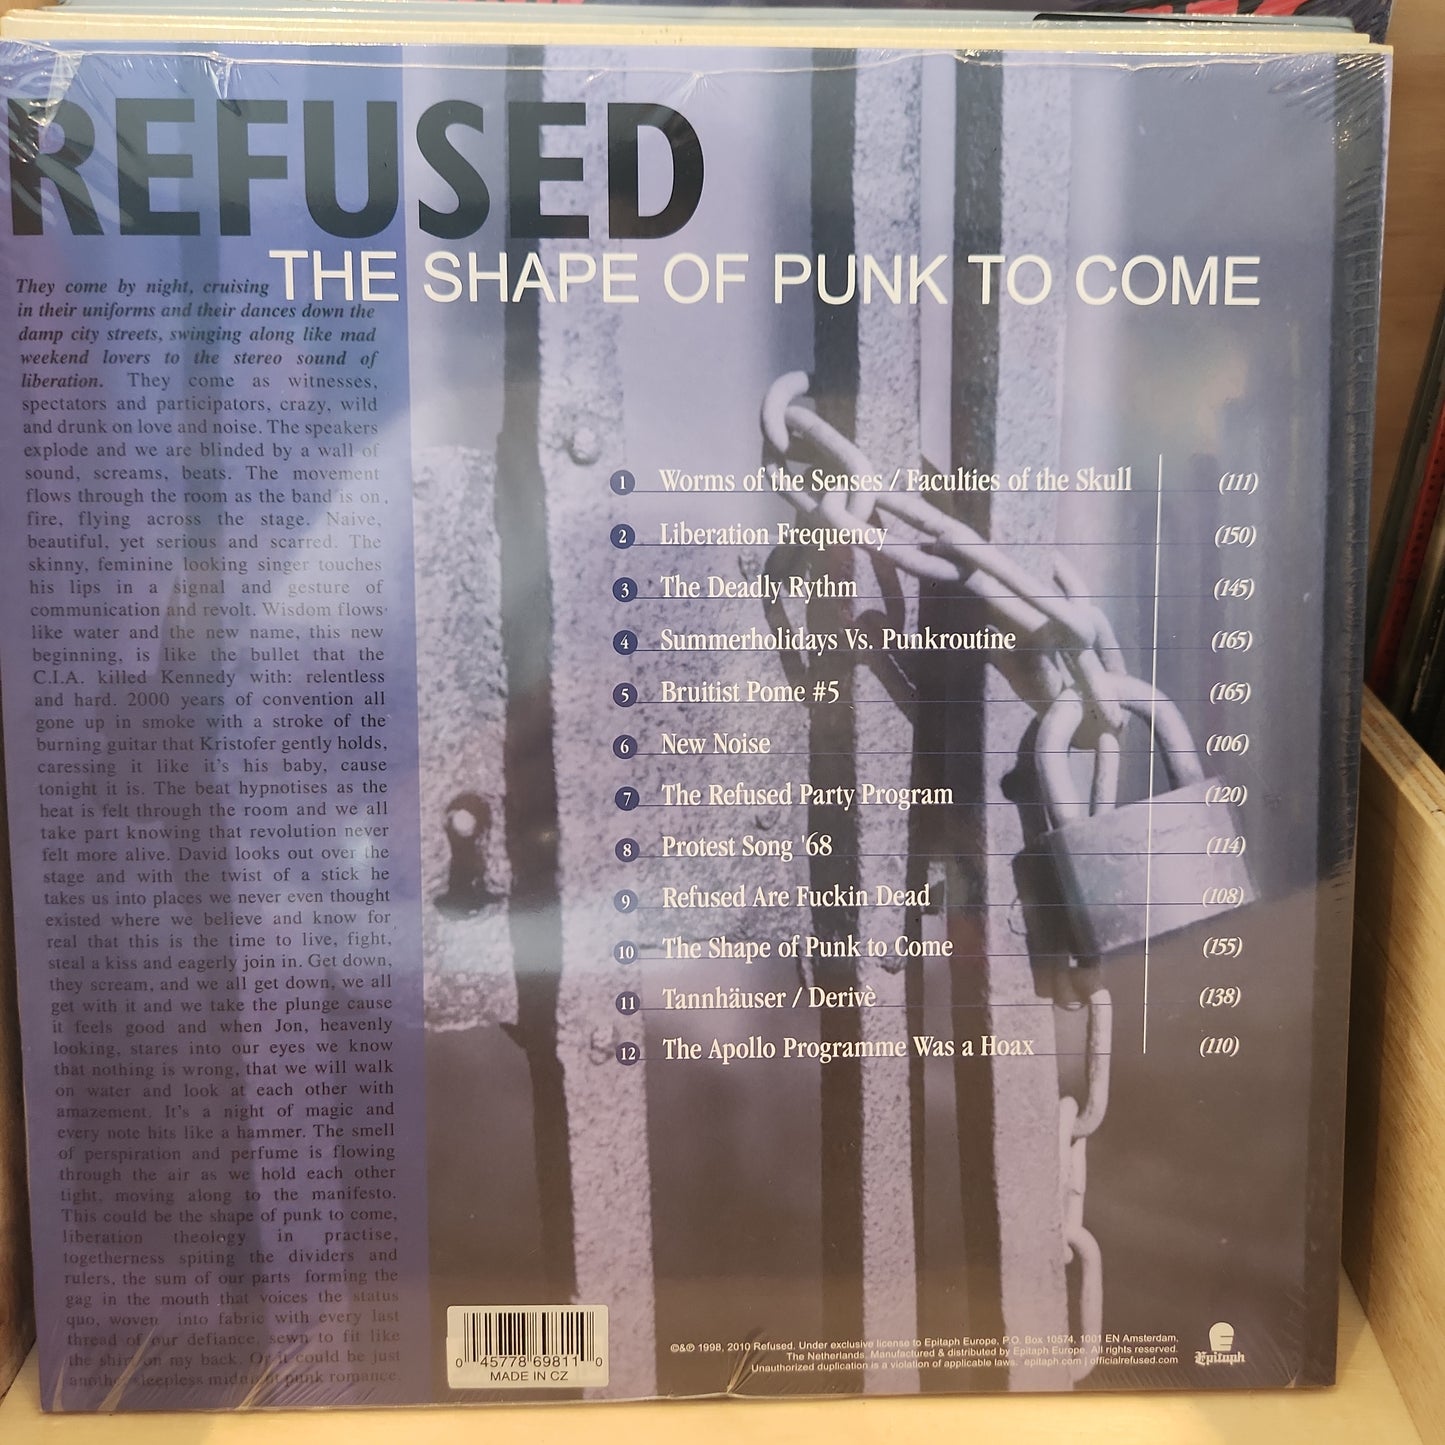 Refused - The Shape of Punk to Come - Vinyl LP